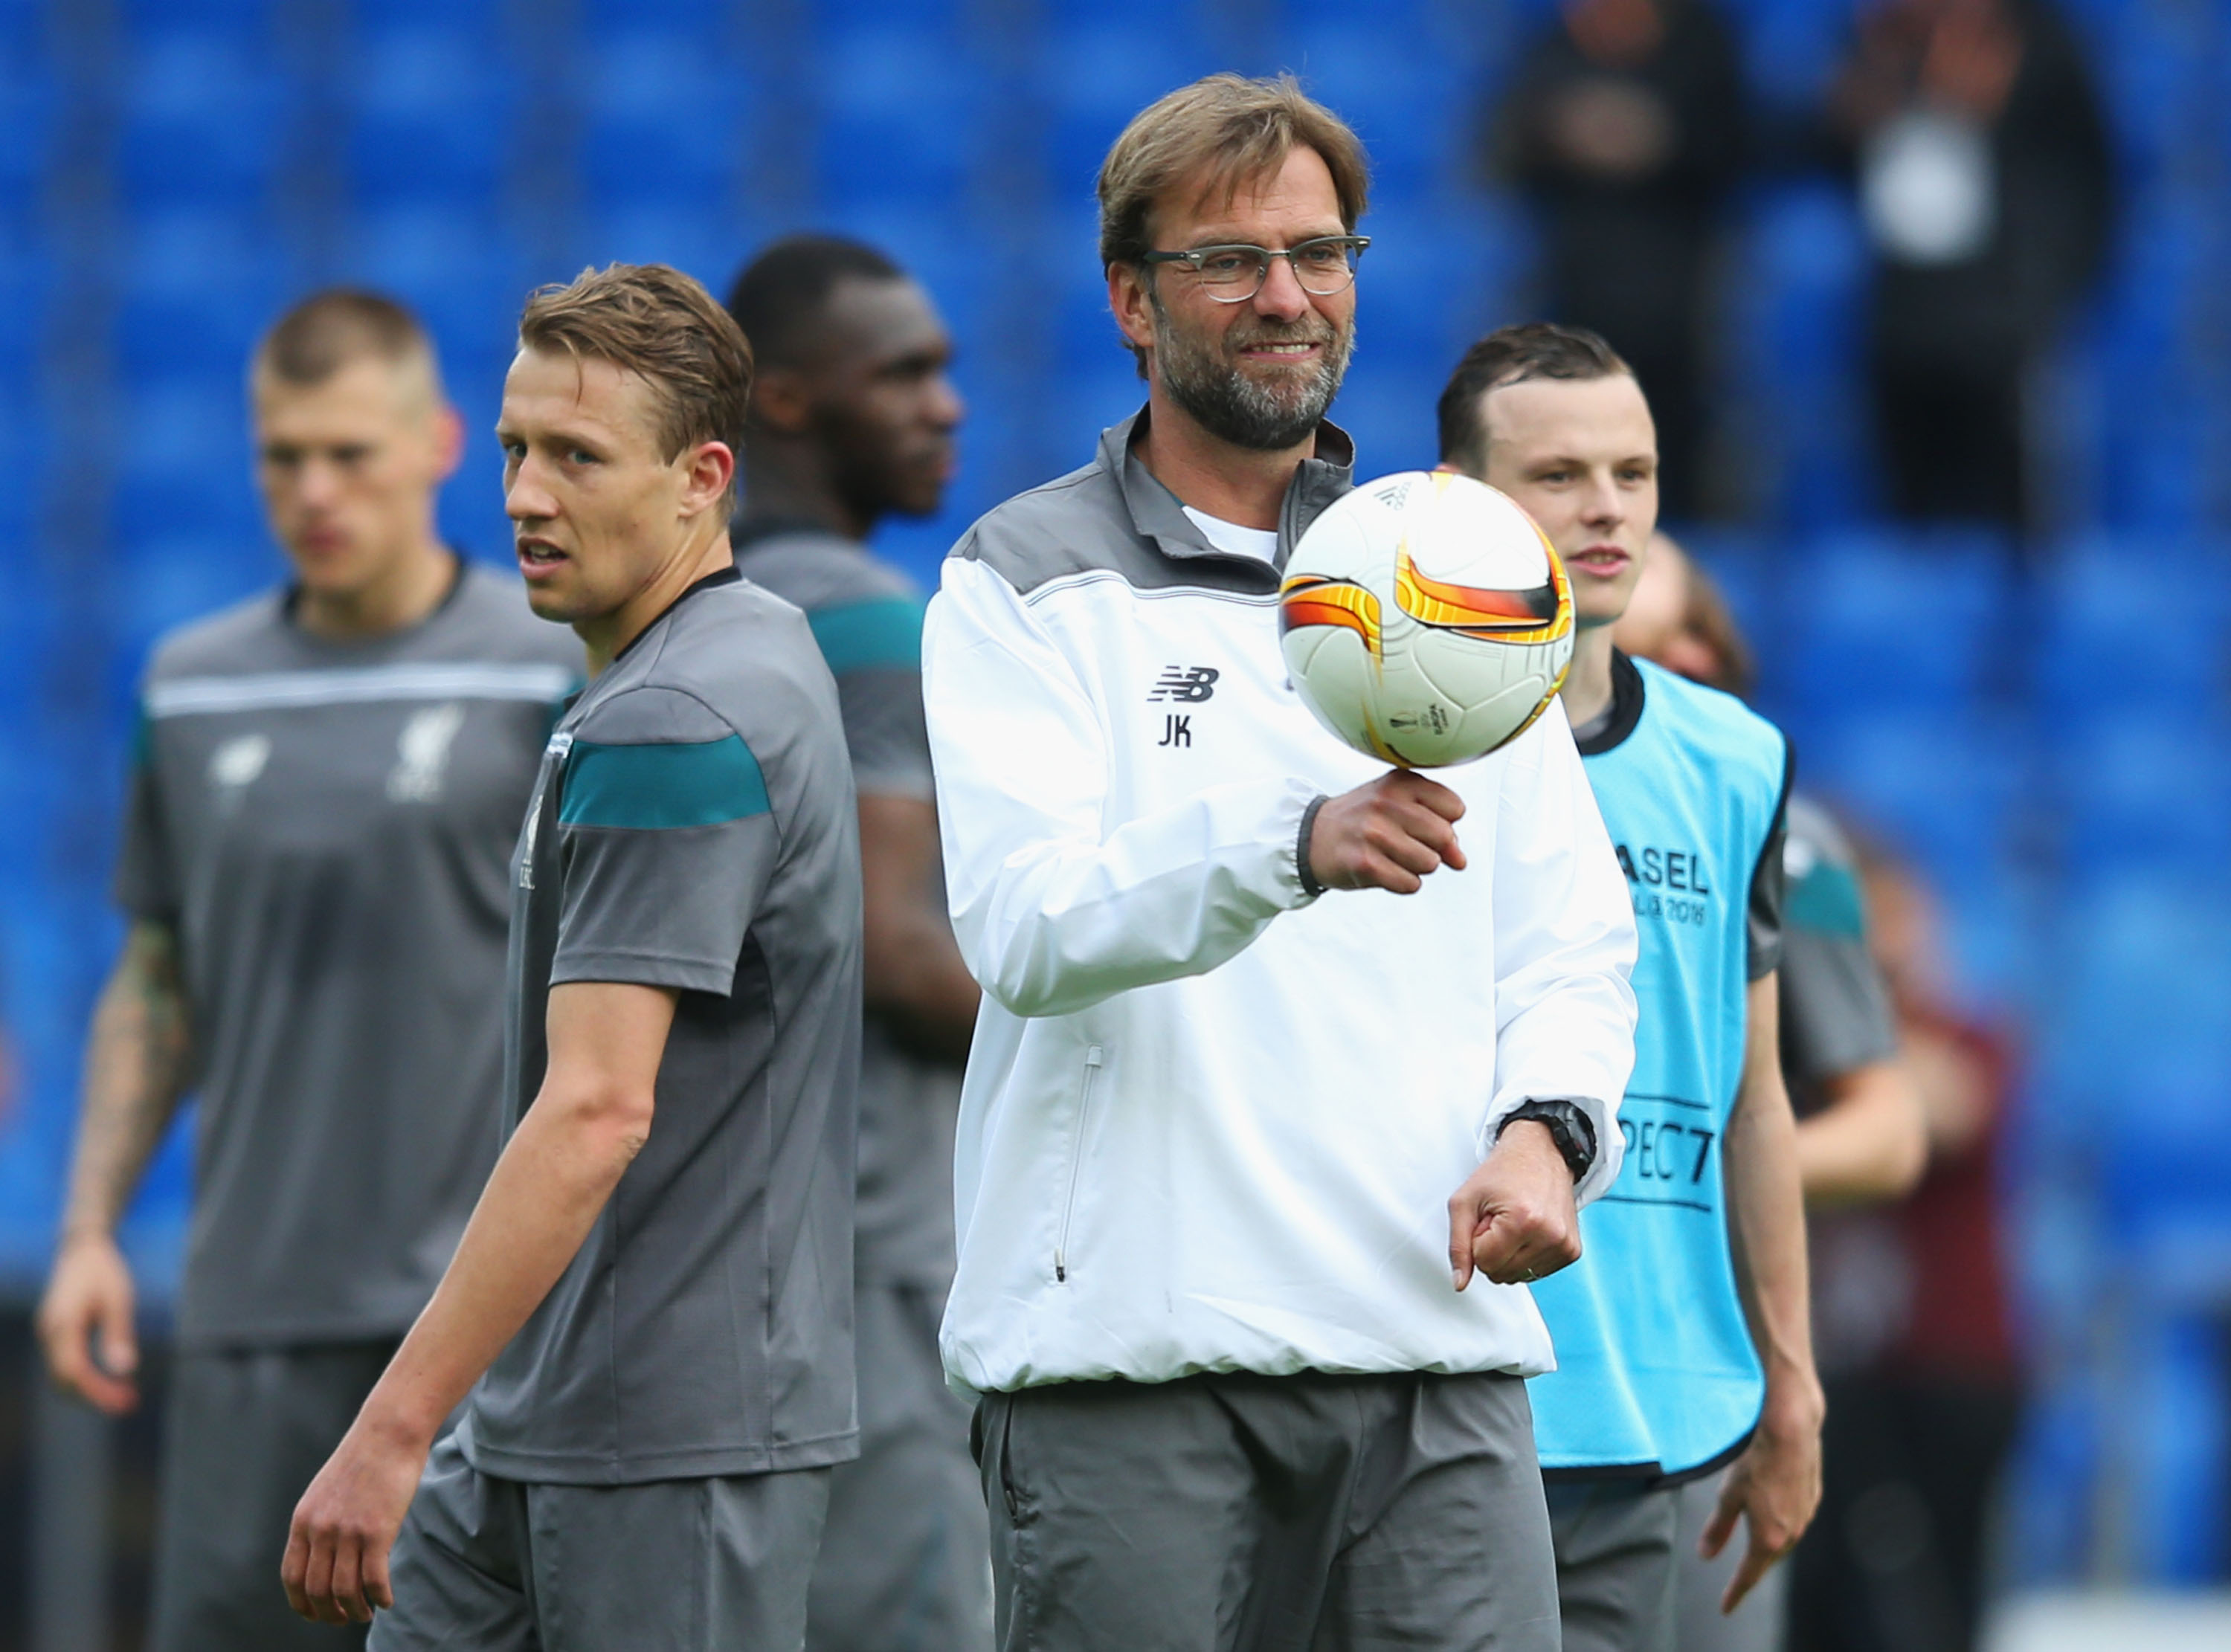 BASEL, SWITZERLAND - MAY 17:  Jurgen Klopp, manager of Liverpool looks on with Lucas Leiva during a Liverpool training session on the eve of the UEFA Europa League Final against Sevilla at St. Jakob-Park on May 17, 2016 in Basel, Switzerland.  (Photo by Lars Baron/Getty Images)